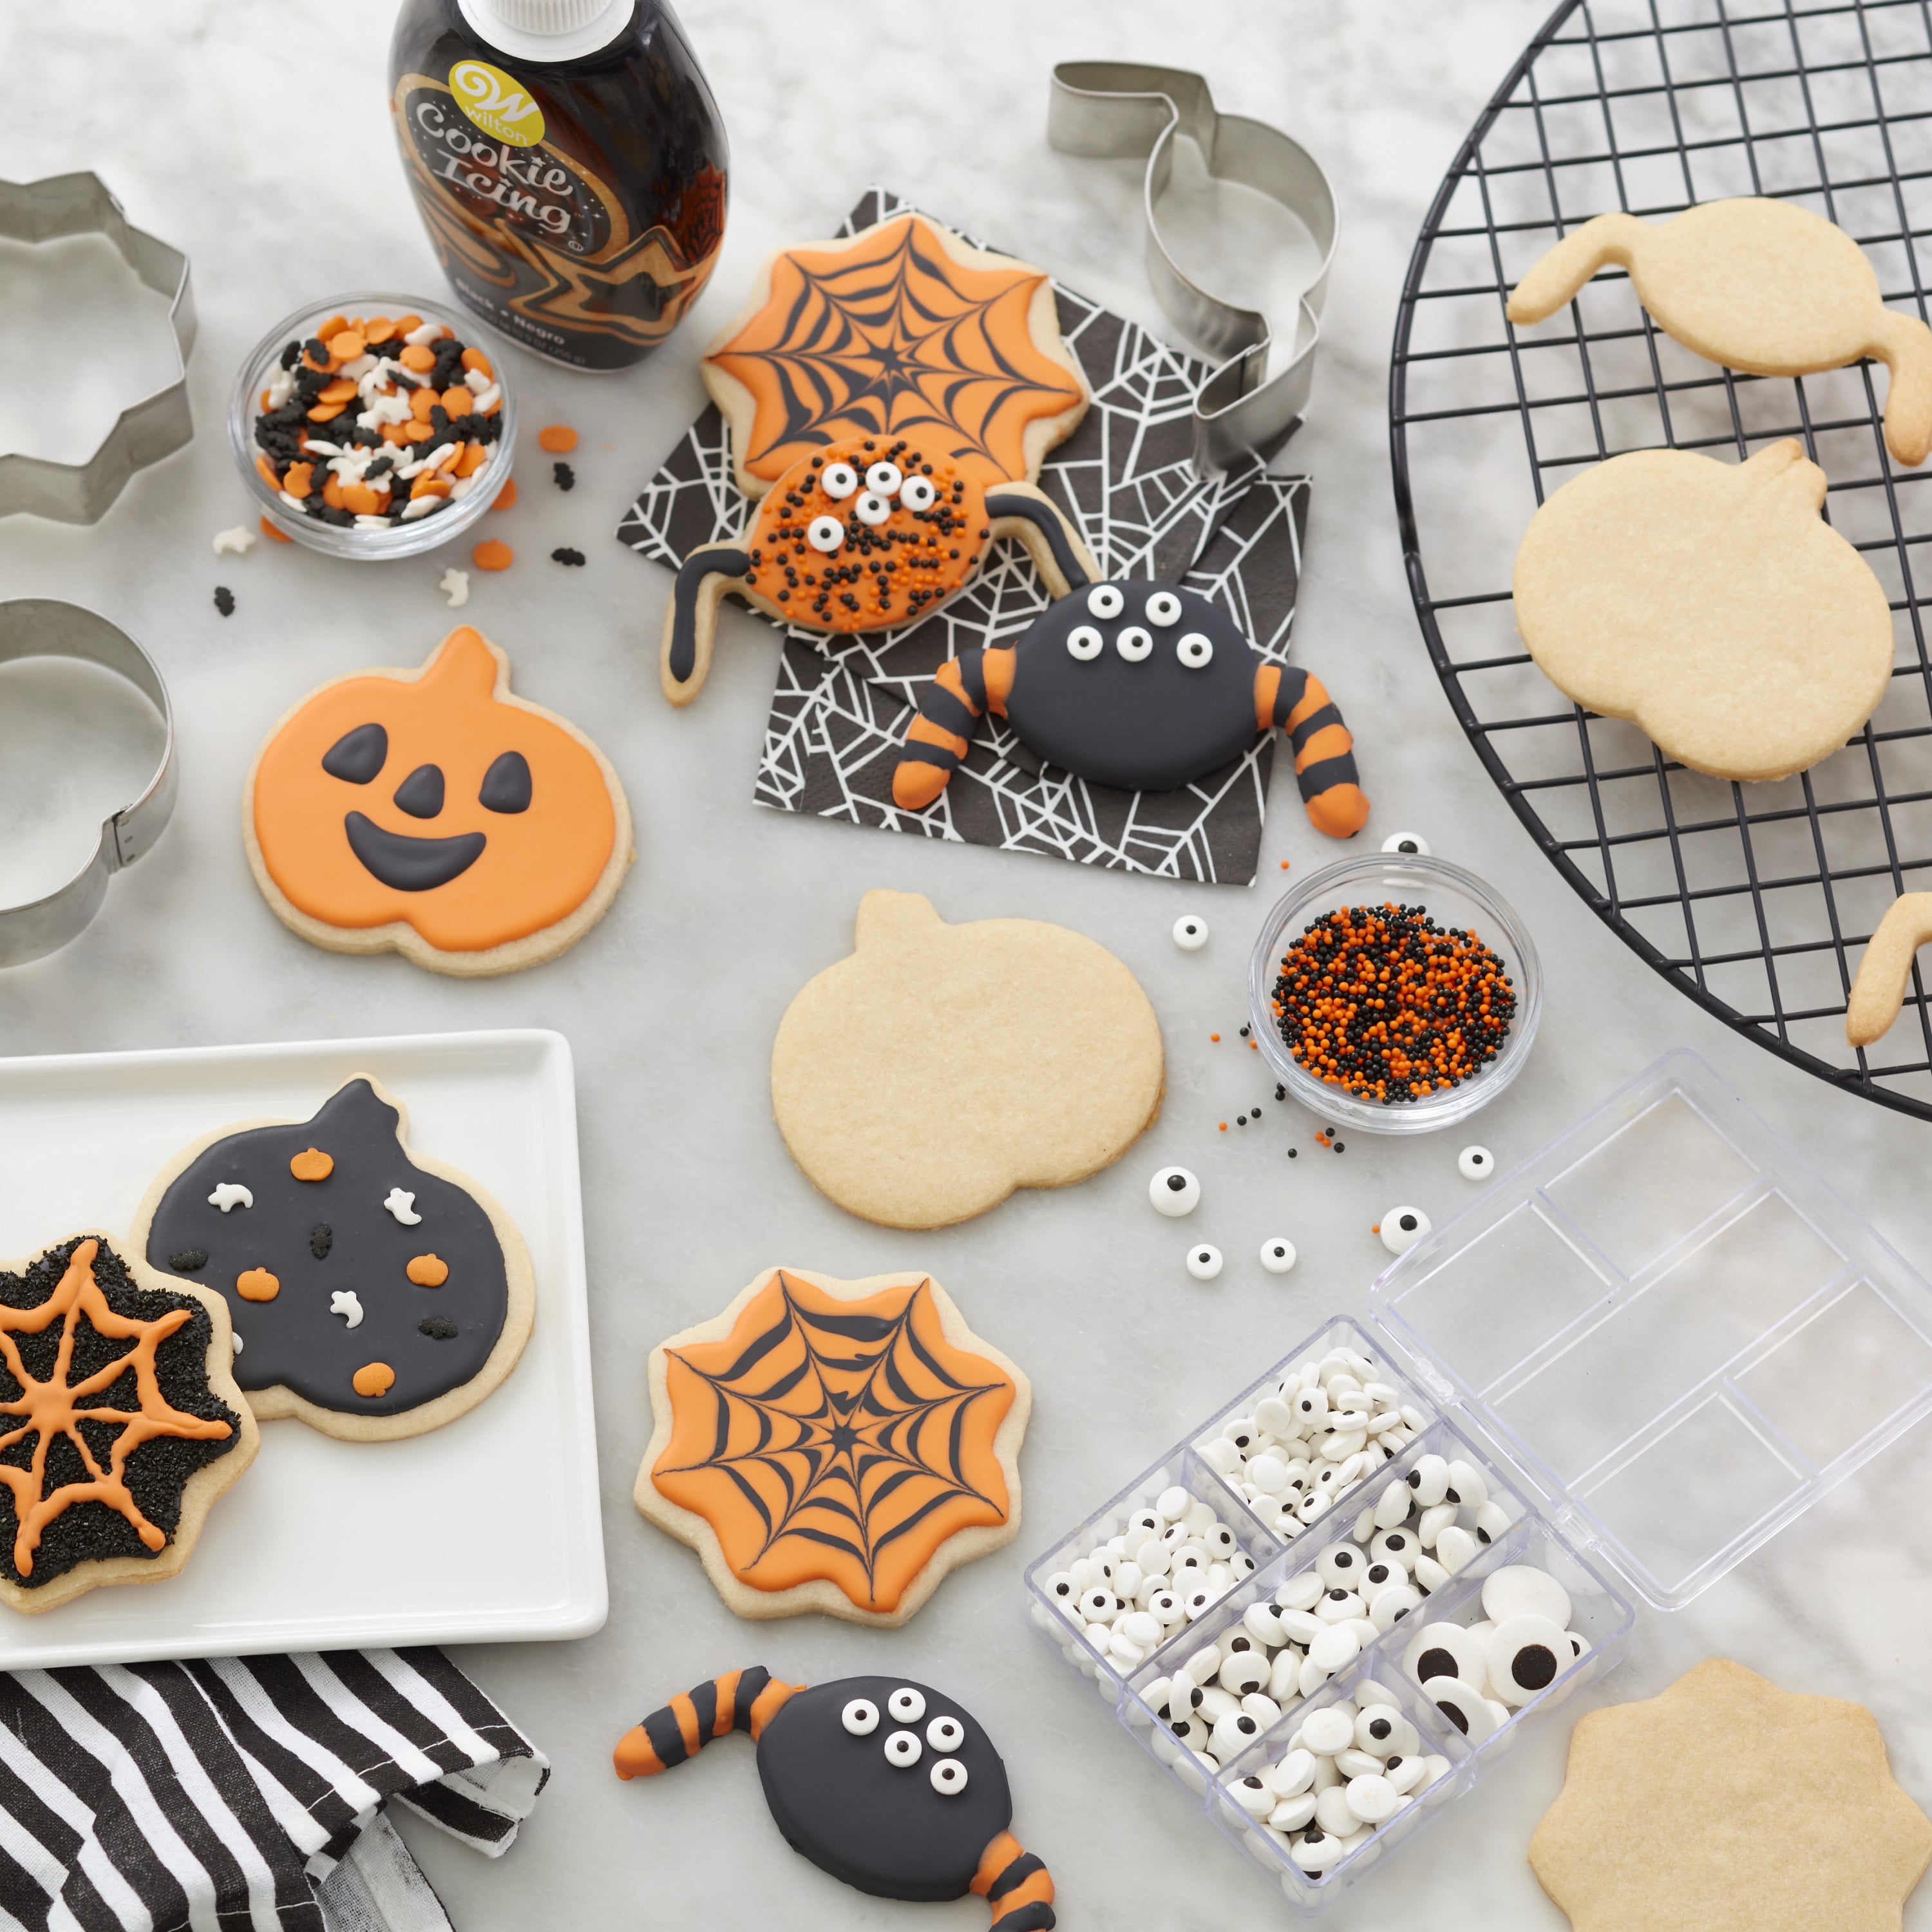 Cookie Icing 101: How to Use Wilton Cookie Icing, Wilton's Baking Blog